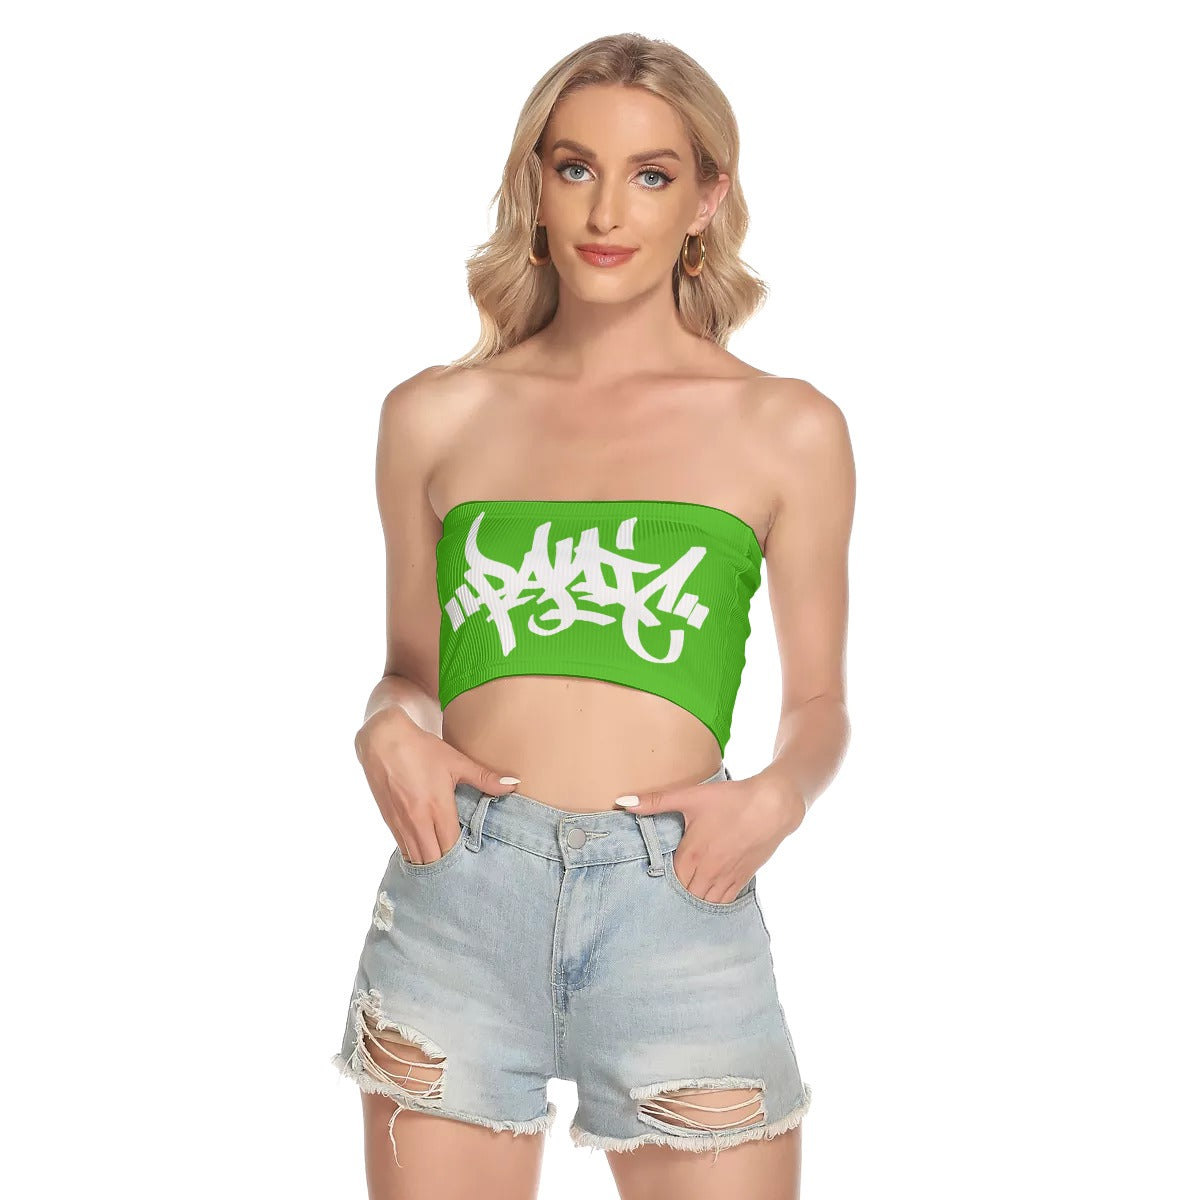 THE LOGO TUBE TOP IN KELLY GREEN - Panic 39